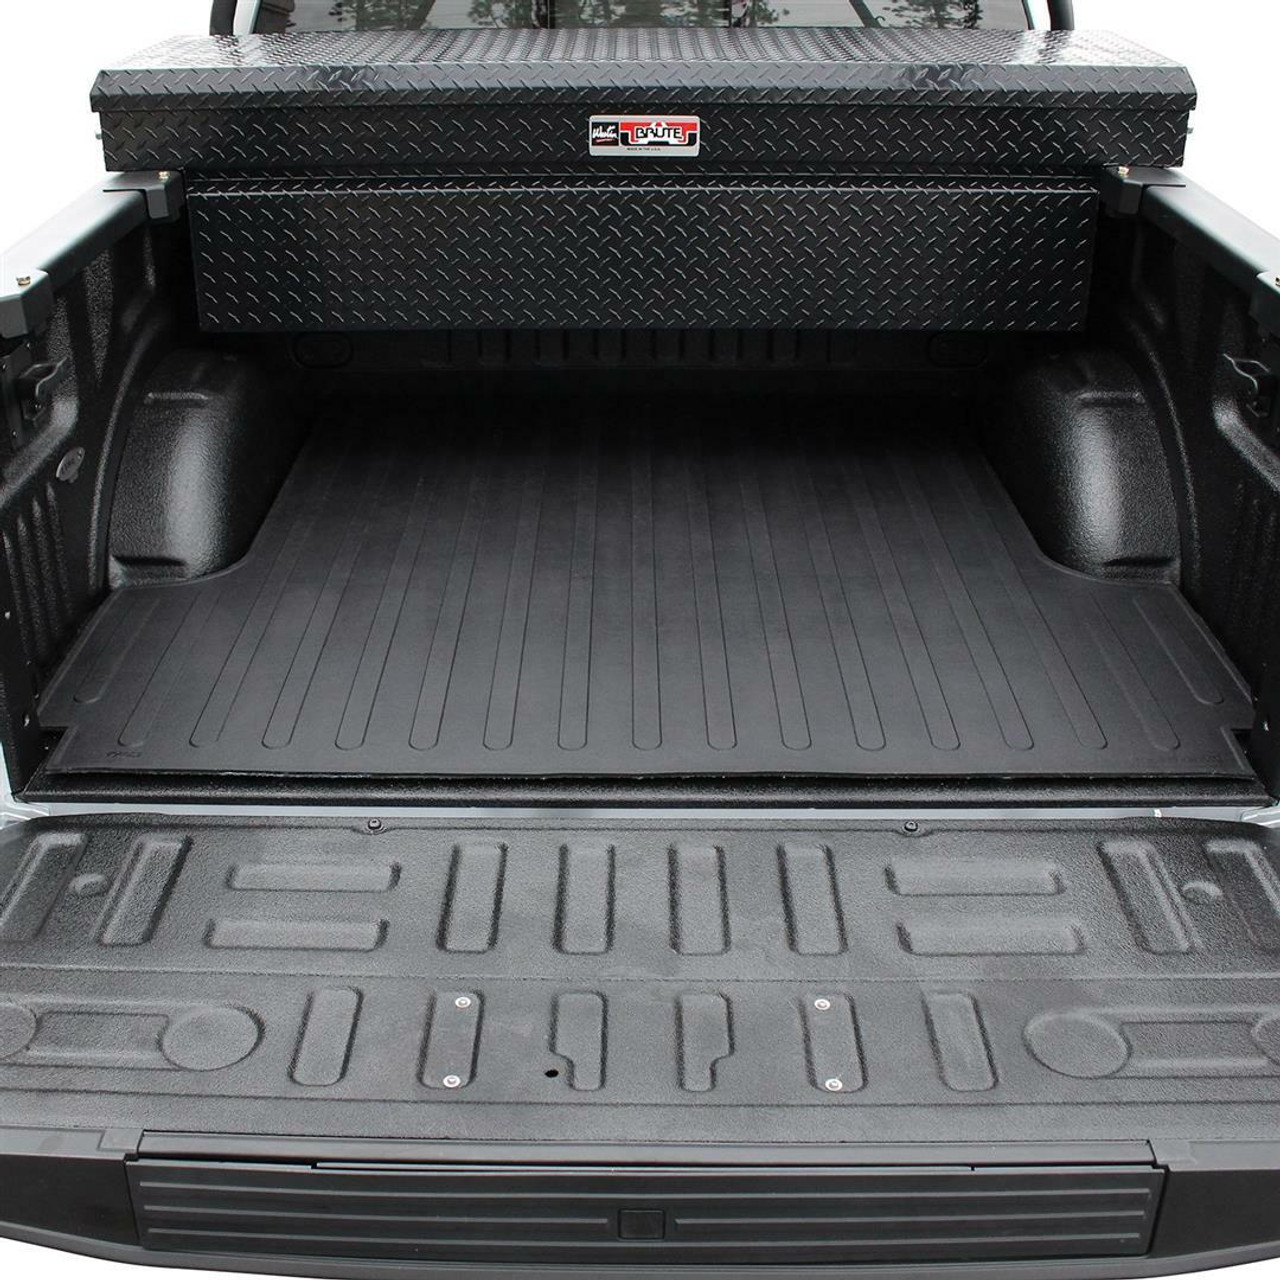 Westin Truck Bed Mat Fits 2007-2021 Toyota Tundra 6.5' Bed 50-6225 65" x 79"